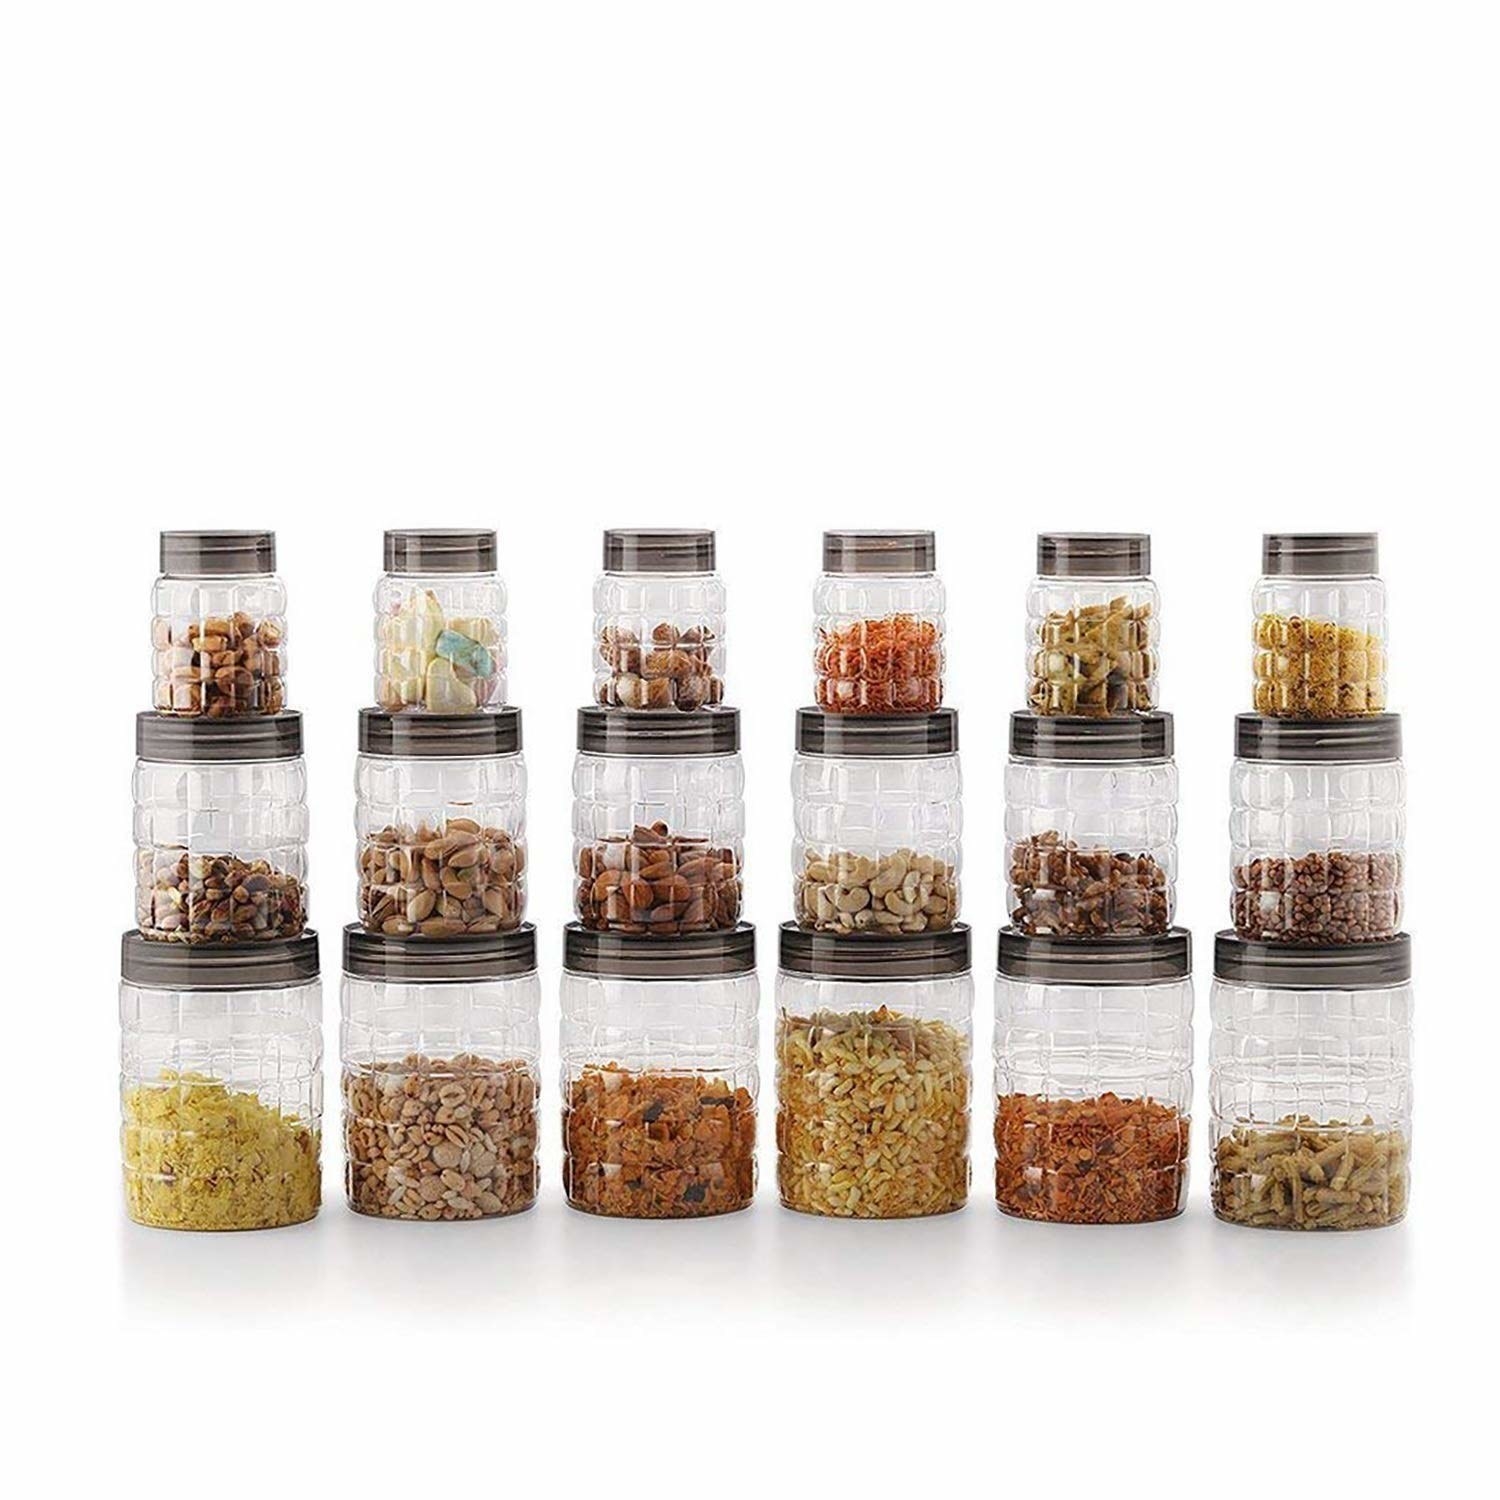 An 18 piece canister set with food items in it 